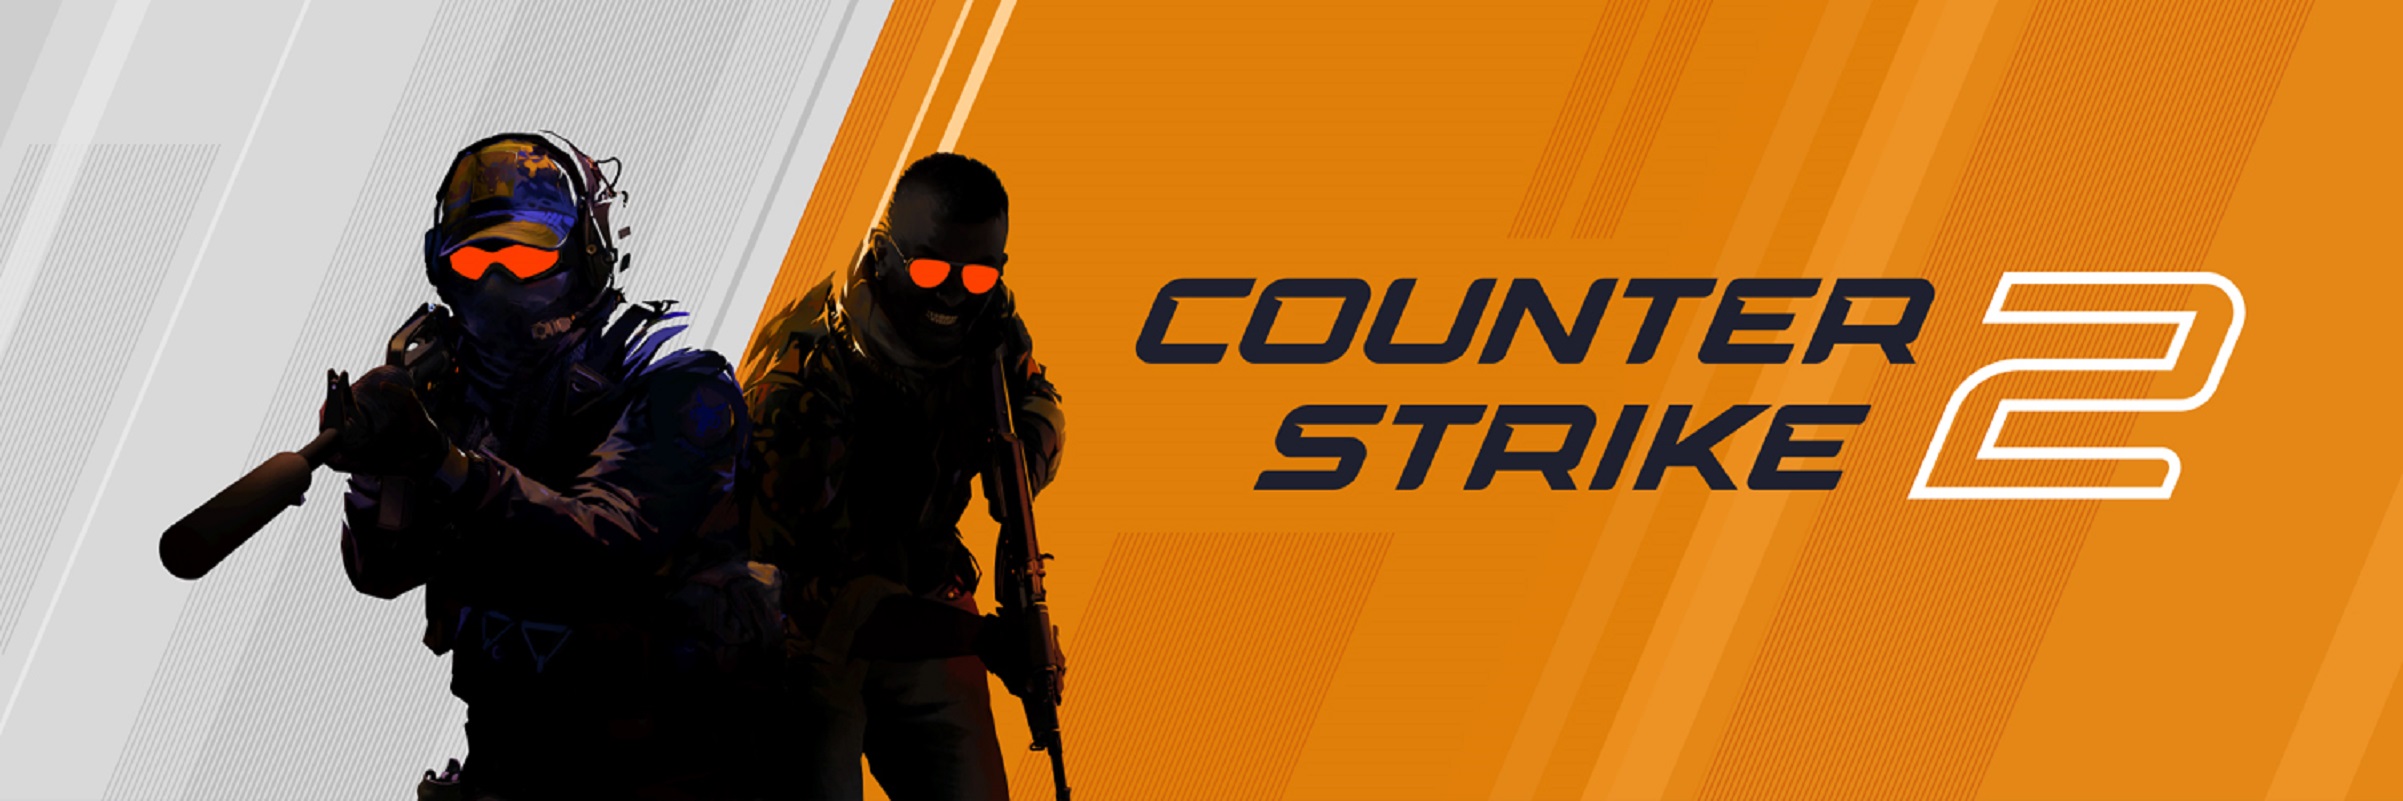 Counter Strike 2 is changing!